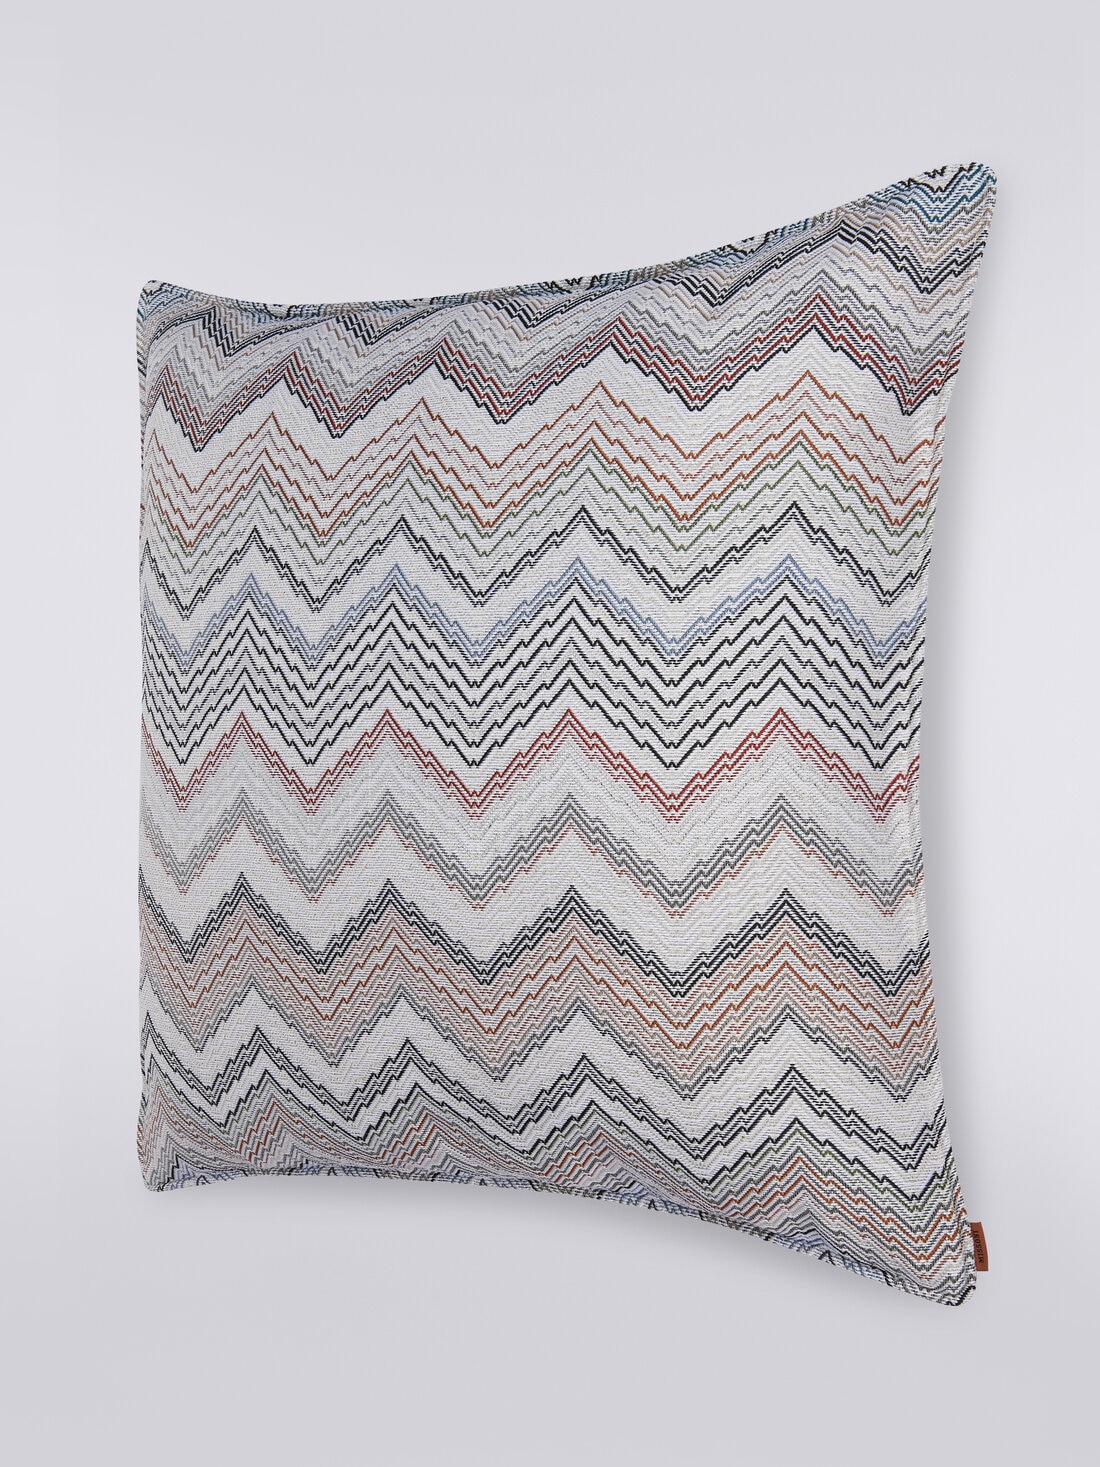 Milano 60x60 cm cushion with knitted effect, White  - 8051575830587 - 1